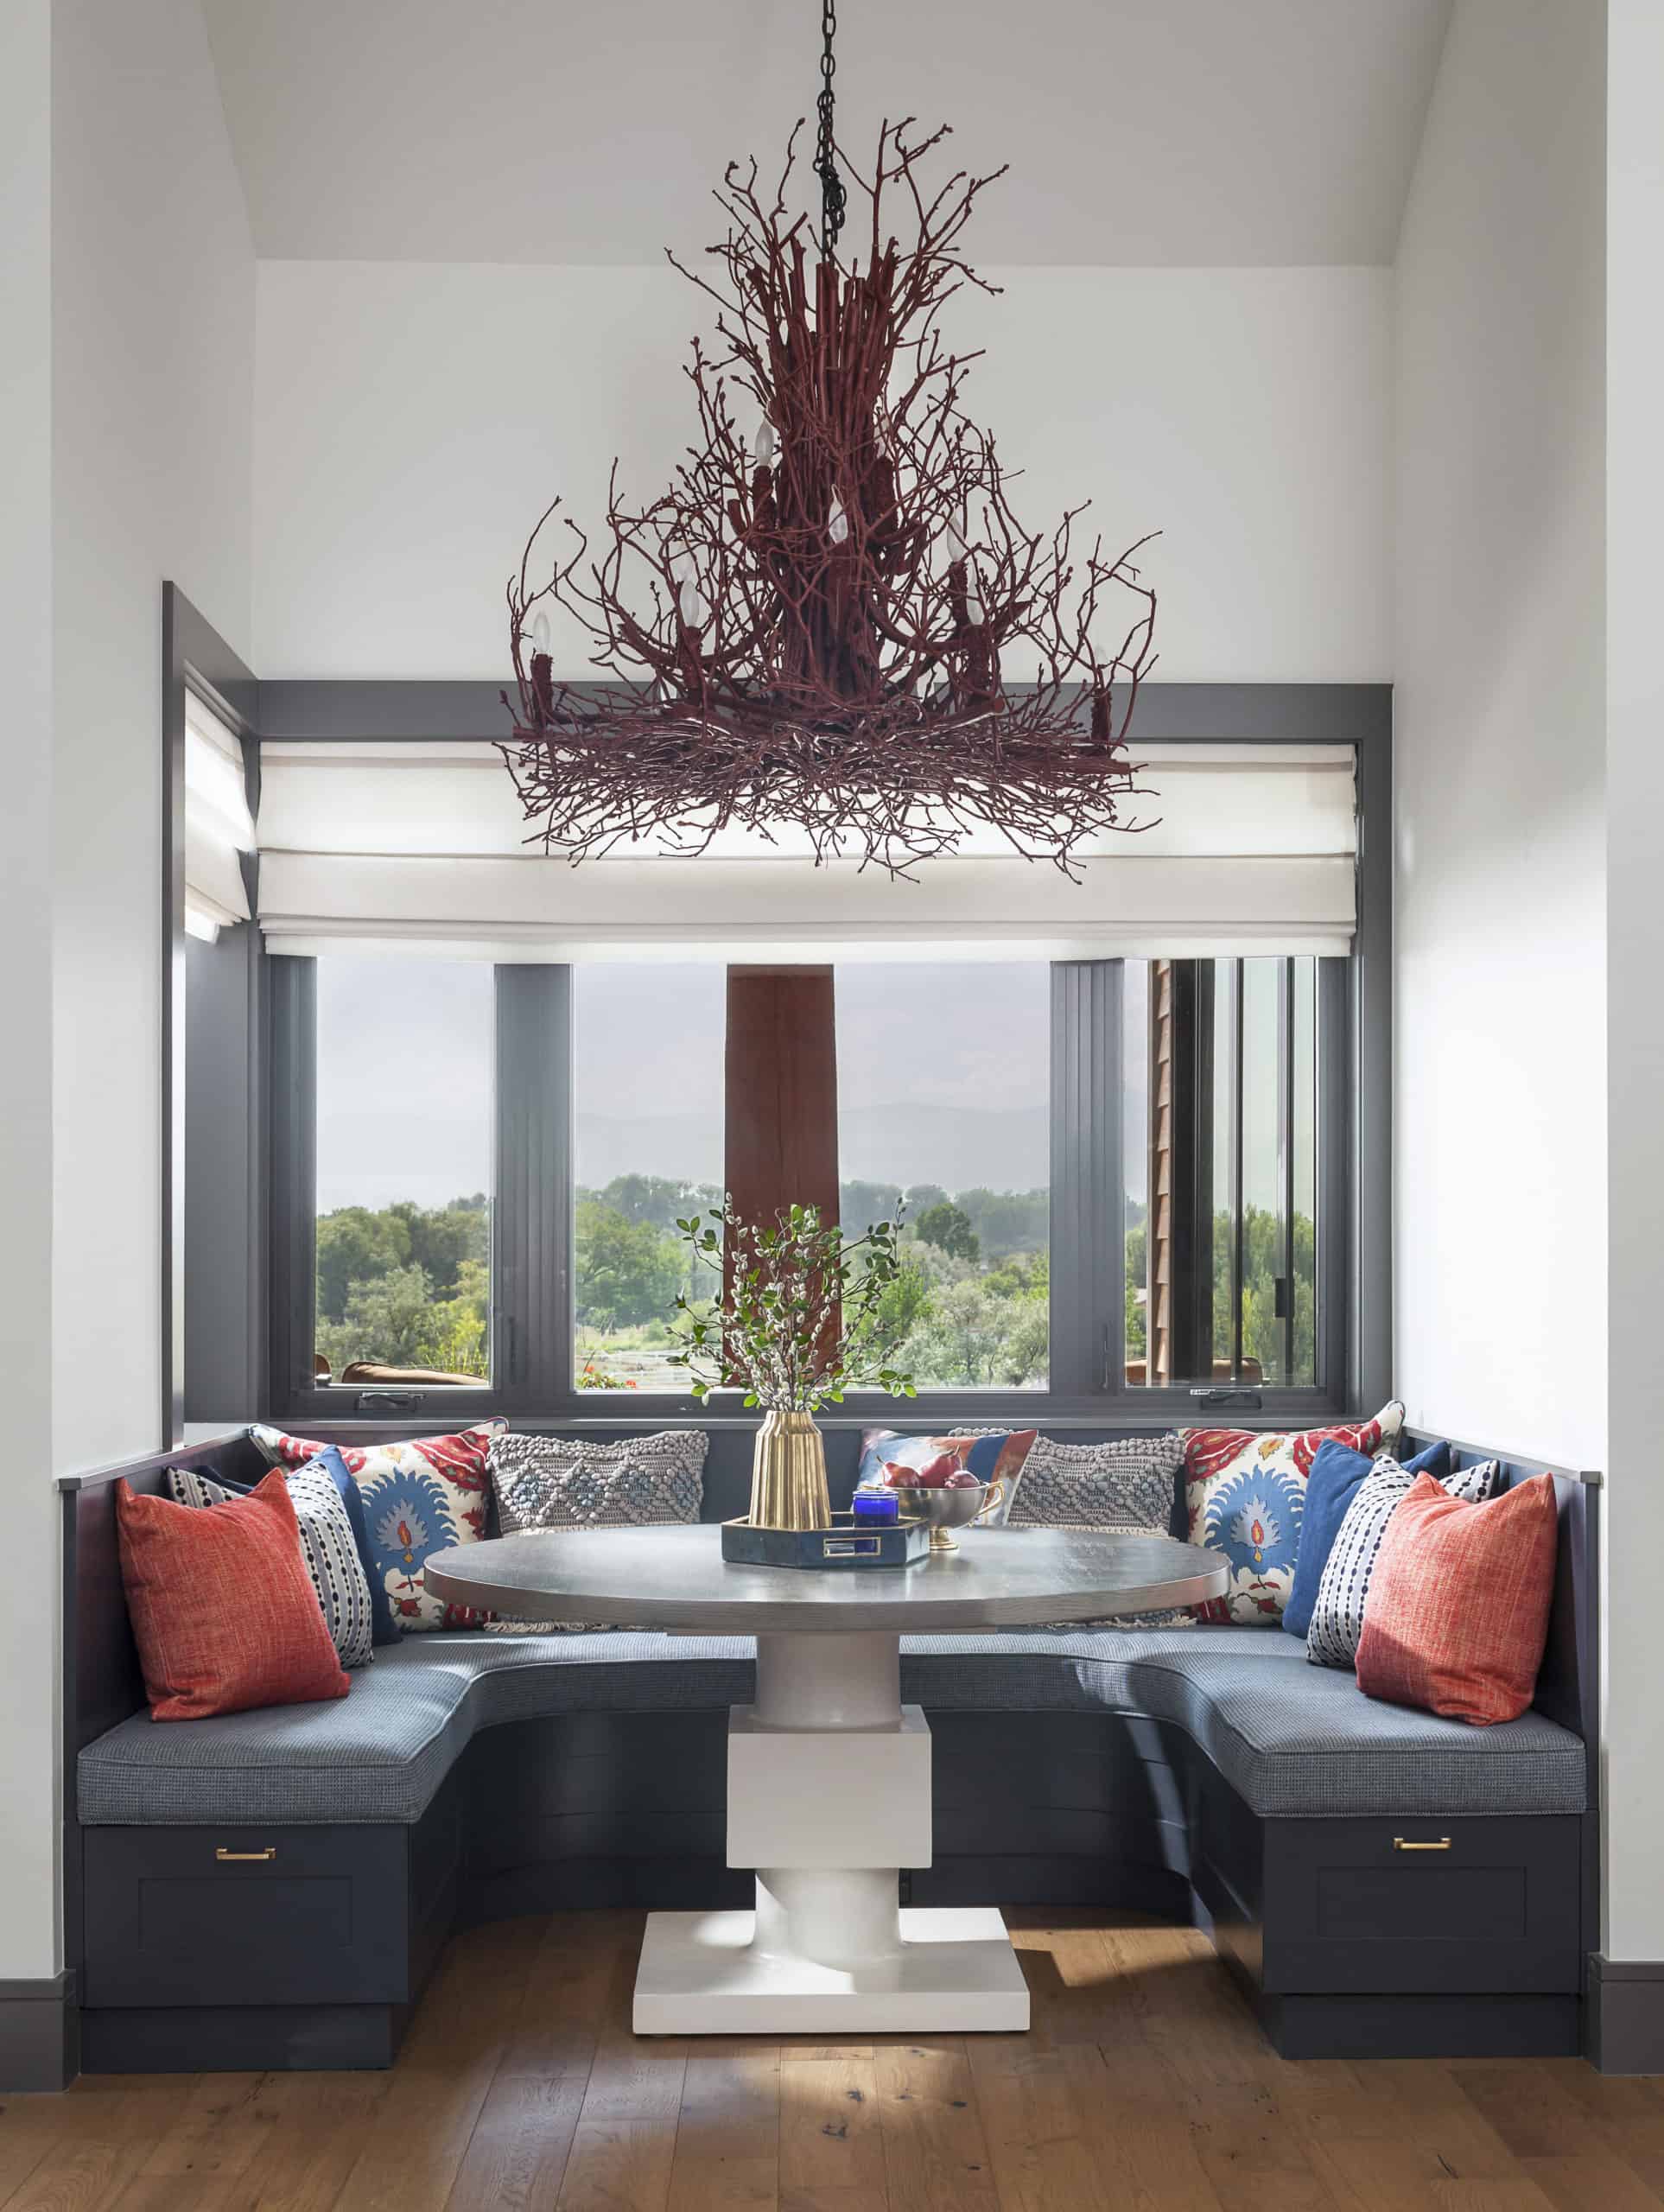 Built-in benches and creative branch twig chandelier in breakfast nook